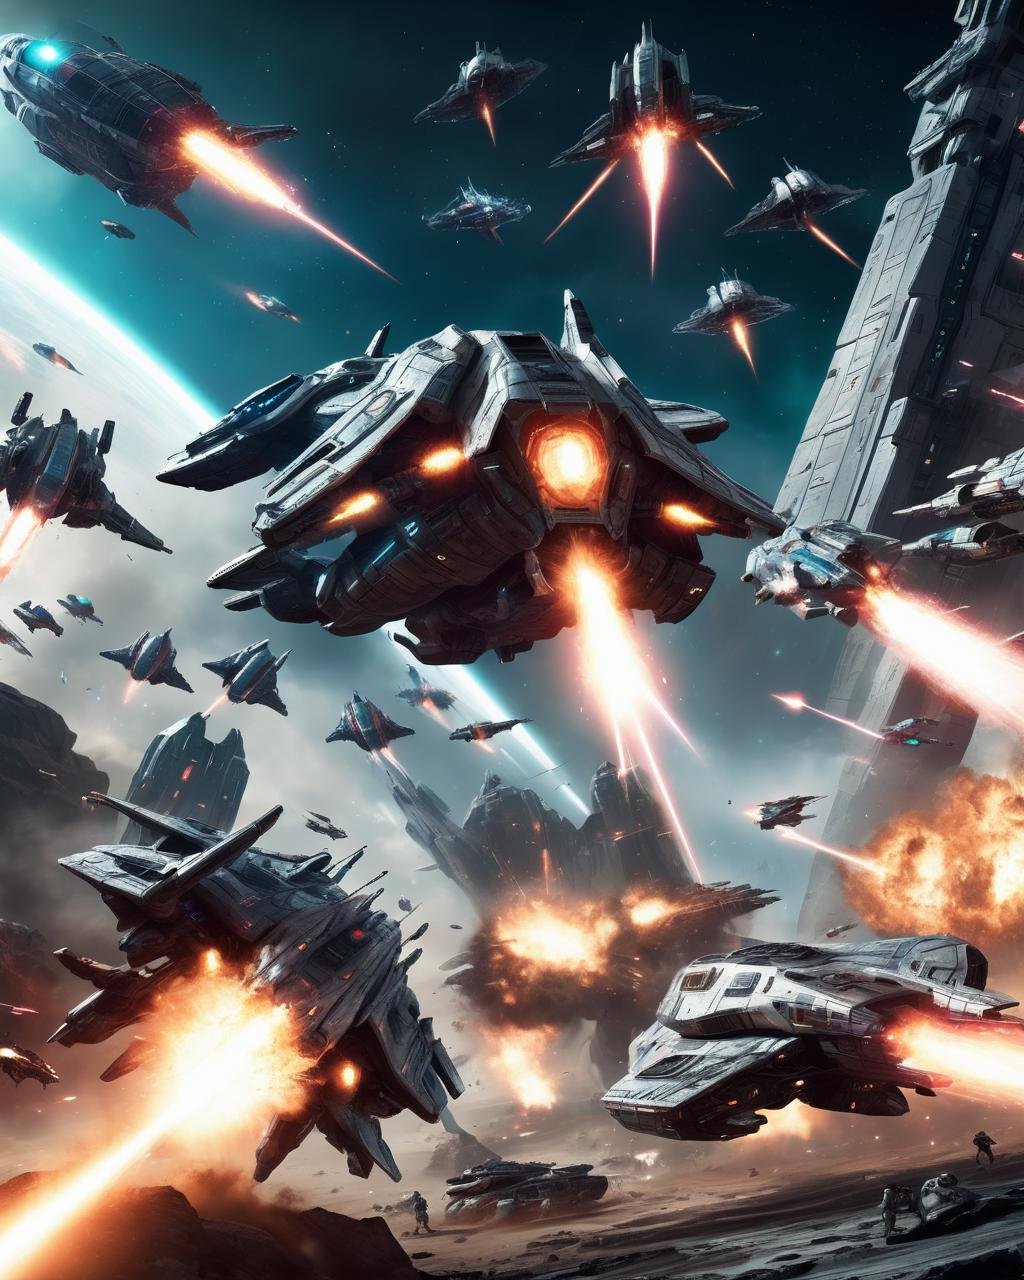 -A thrilling sci-fi battle scene featuring futuristic spaceships, laser weapons, and a sprawling intergalactic battlefield. Highly-detailed textures and lighting bring the action to life, while realistic physics and a sense of scale add depth and realism.